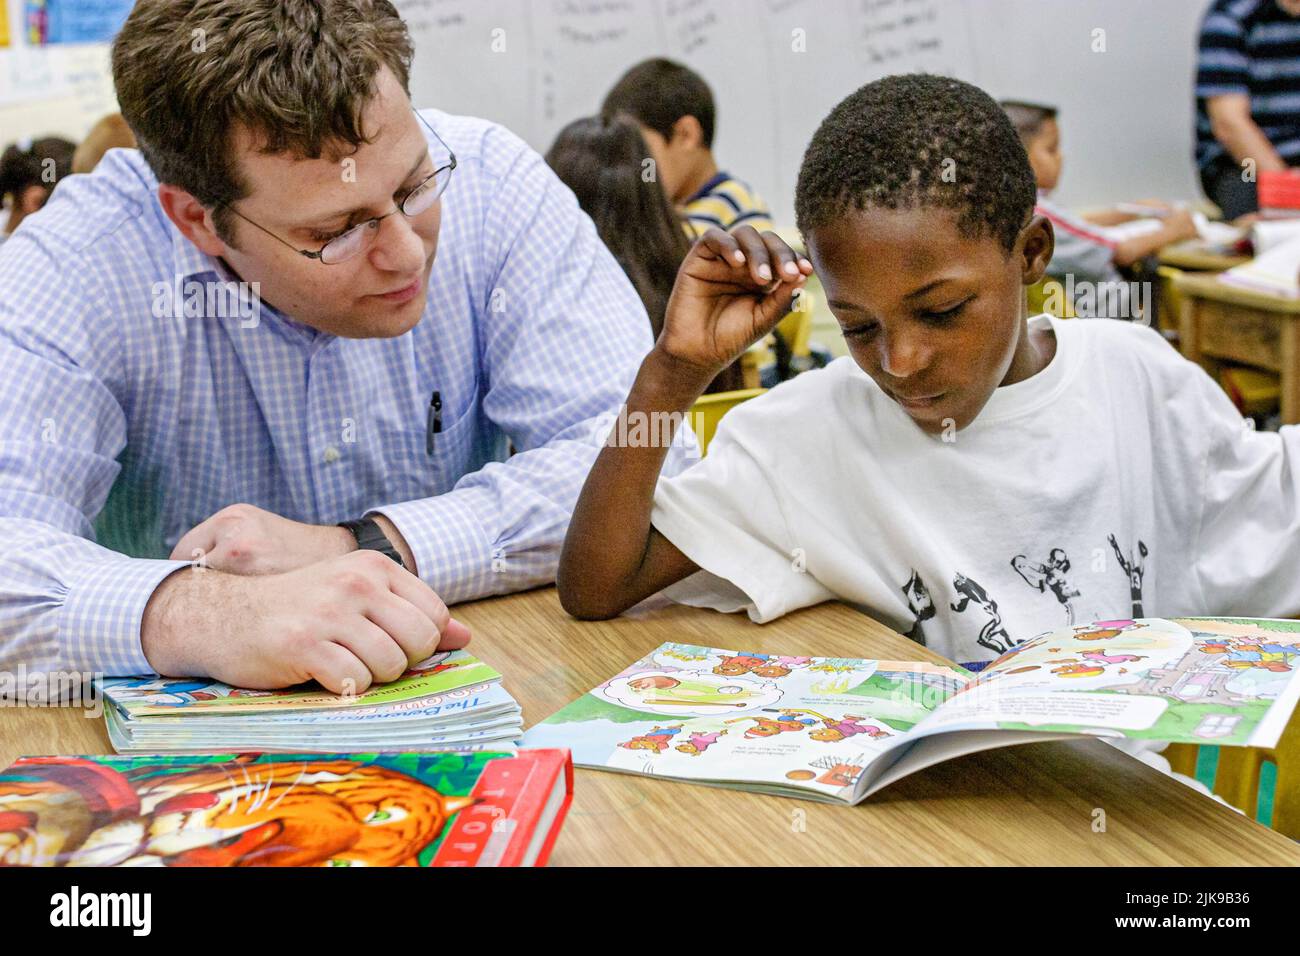 Miami Florida,Frederick Douglass Elementary School,low income community,Black student boy reading classroom visitor man from law firm donating books Stock Photo